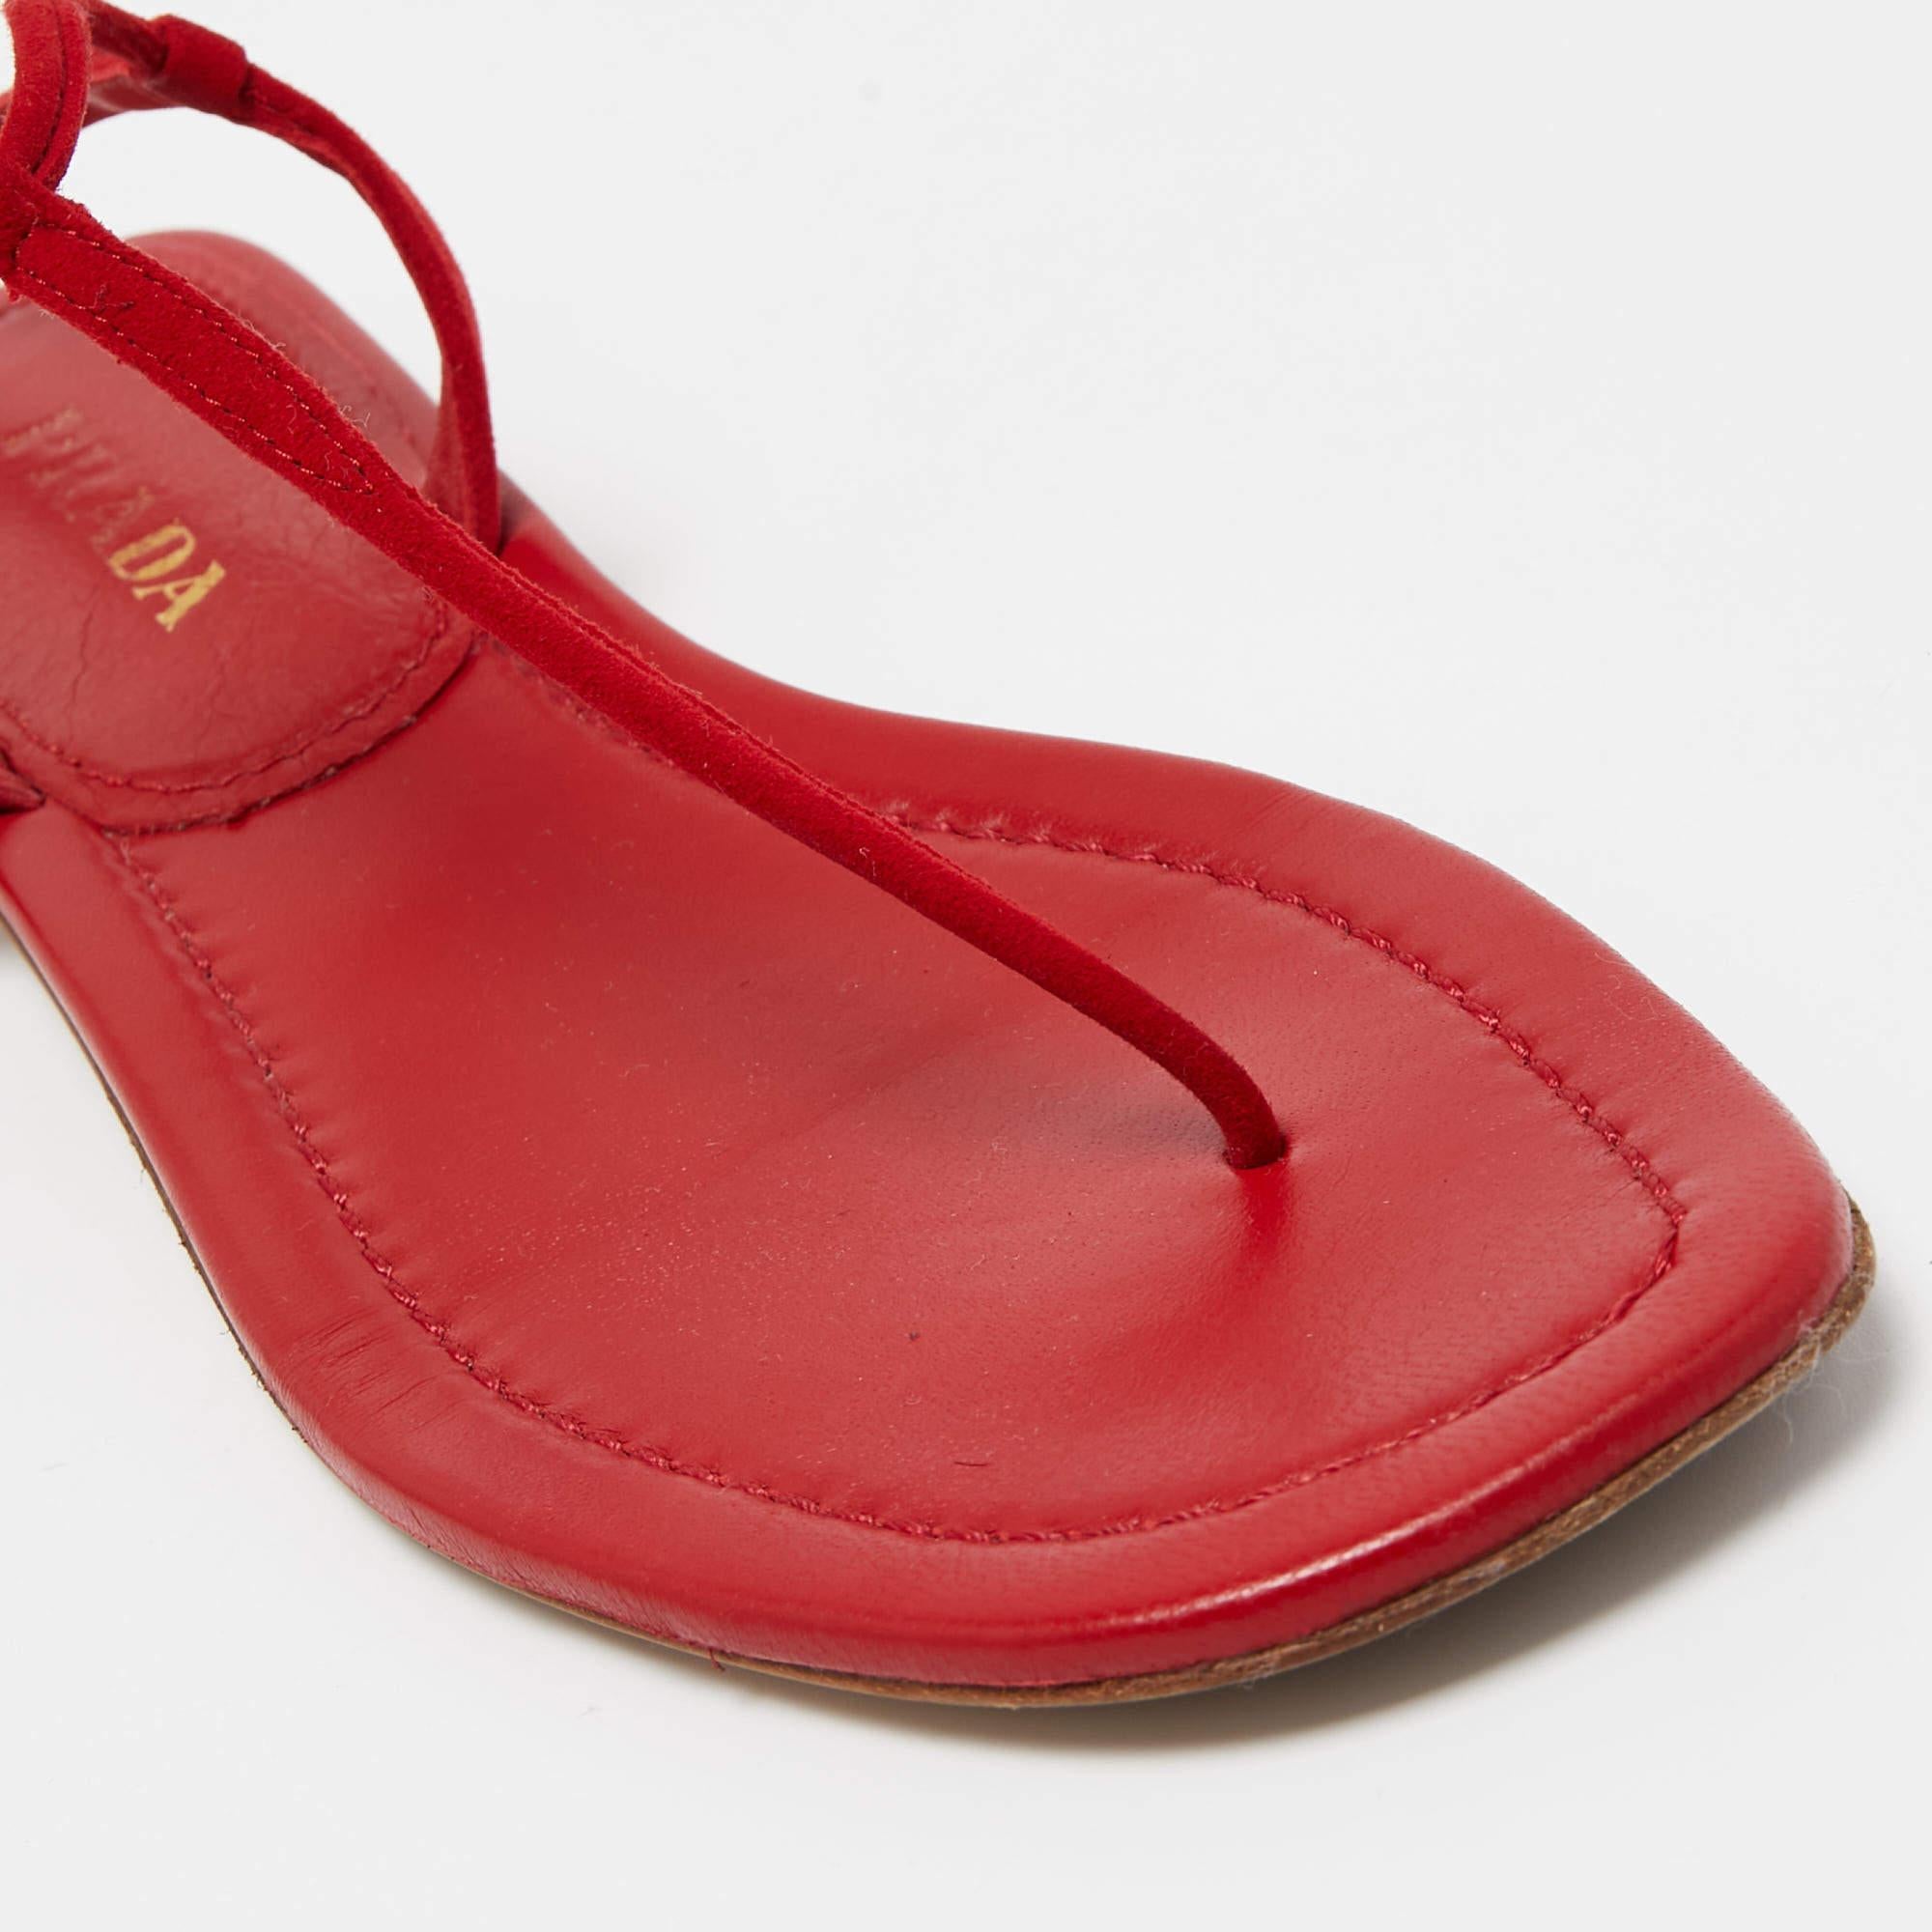 Prada Red Suede Thong Flat Sandals Size 39.5 4